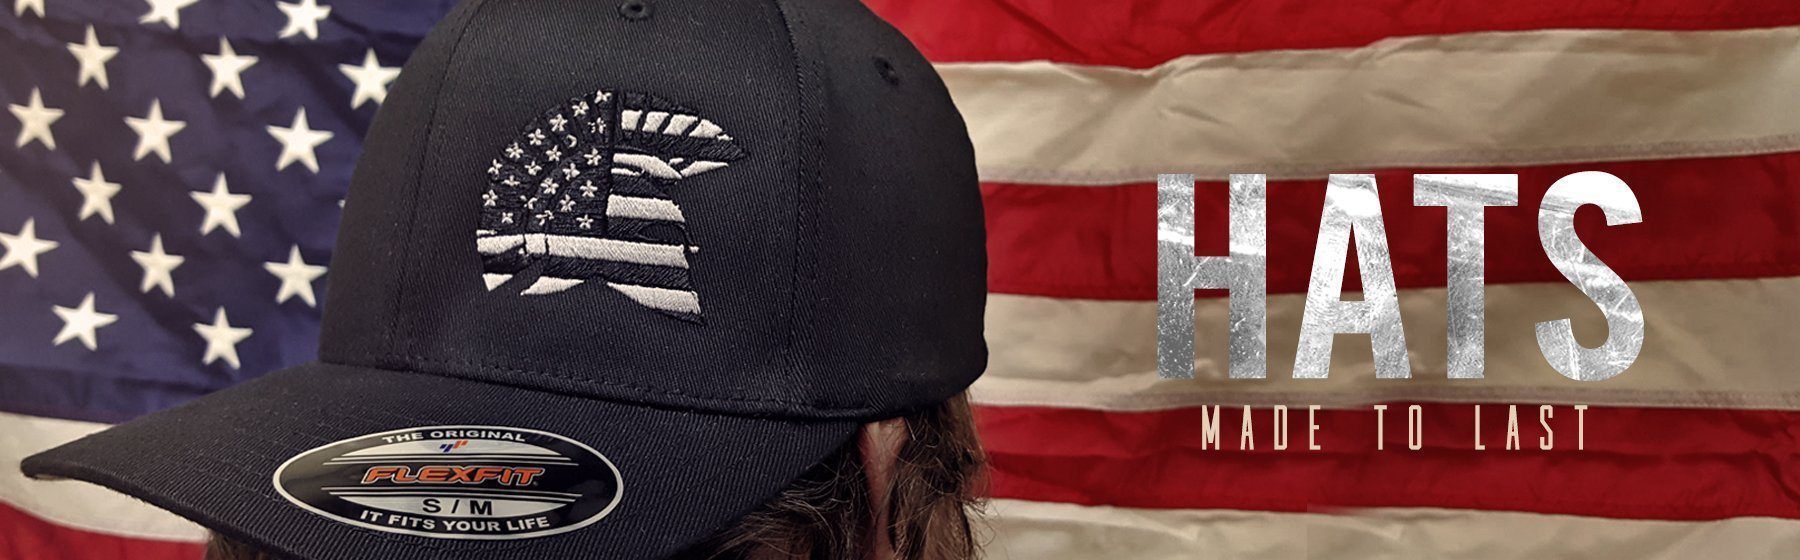 Pull Patch Tactical Hat Authentic Snapback, Black Premium Flat Bill  Baseball Cap, Hook & Loop Fastener With FREE US Flag Patch